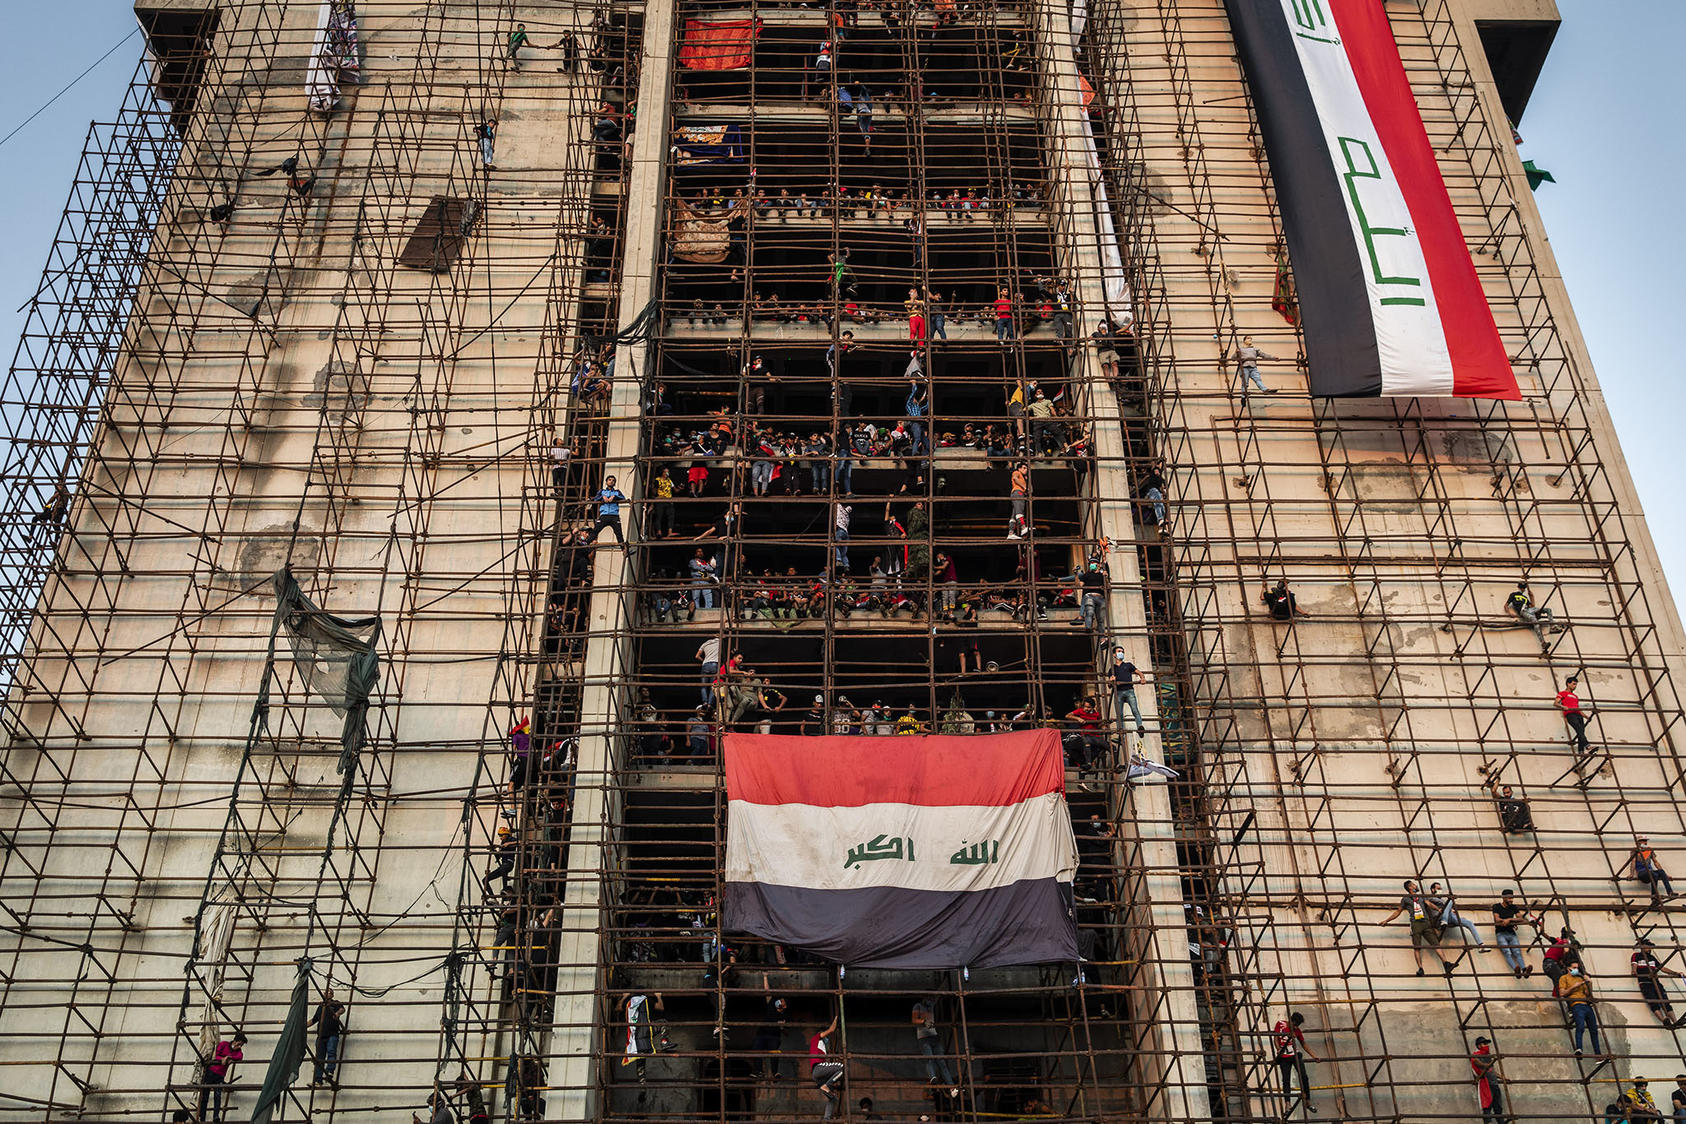 Young men climb scaffolding to reach the upper levels of an unfinished building overlooking mass protests in Tahrir Square in Baghdad, Nov. 1, 2019. (Ivor Prickett/The New York Times)